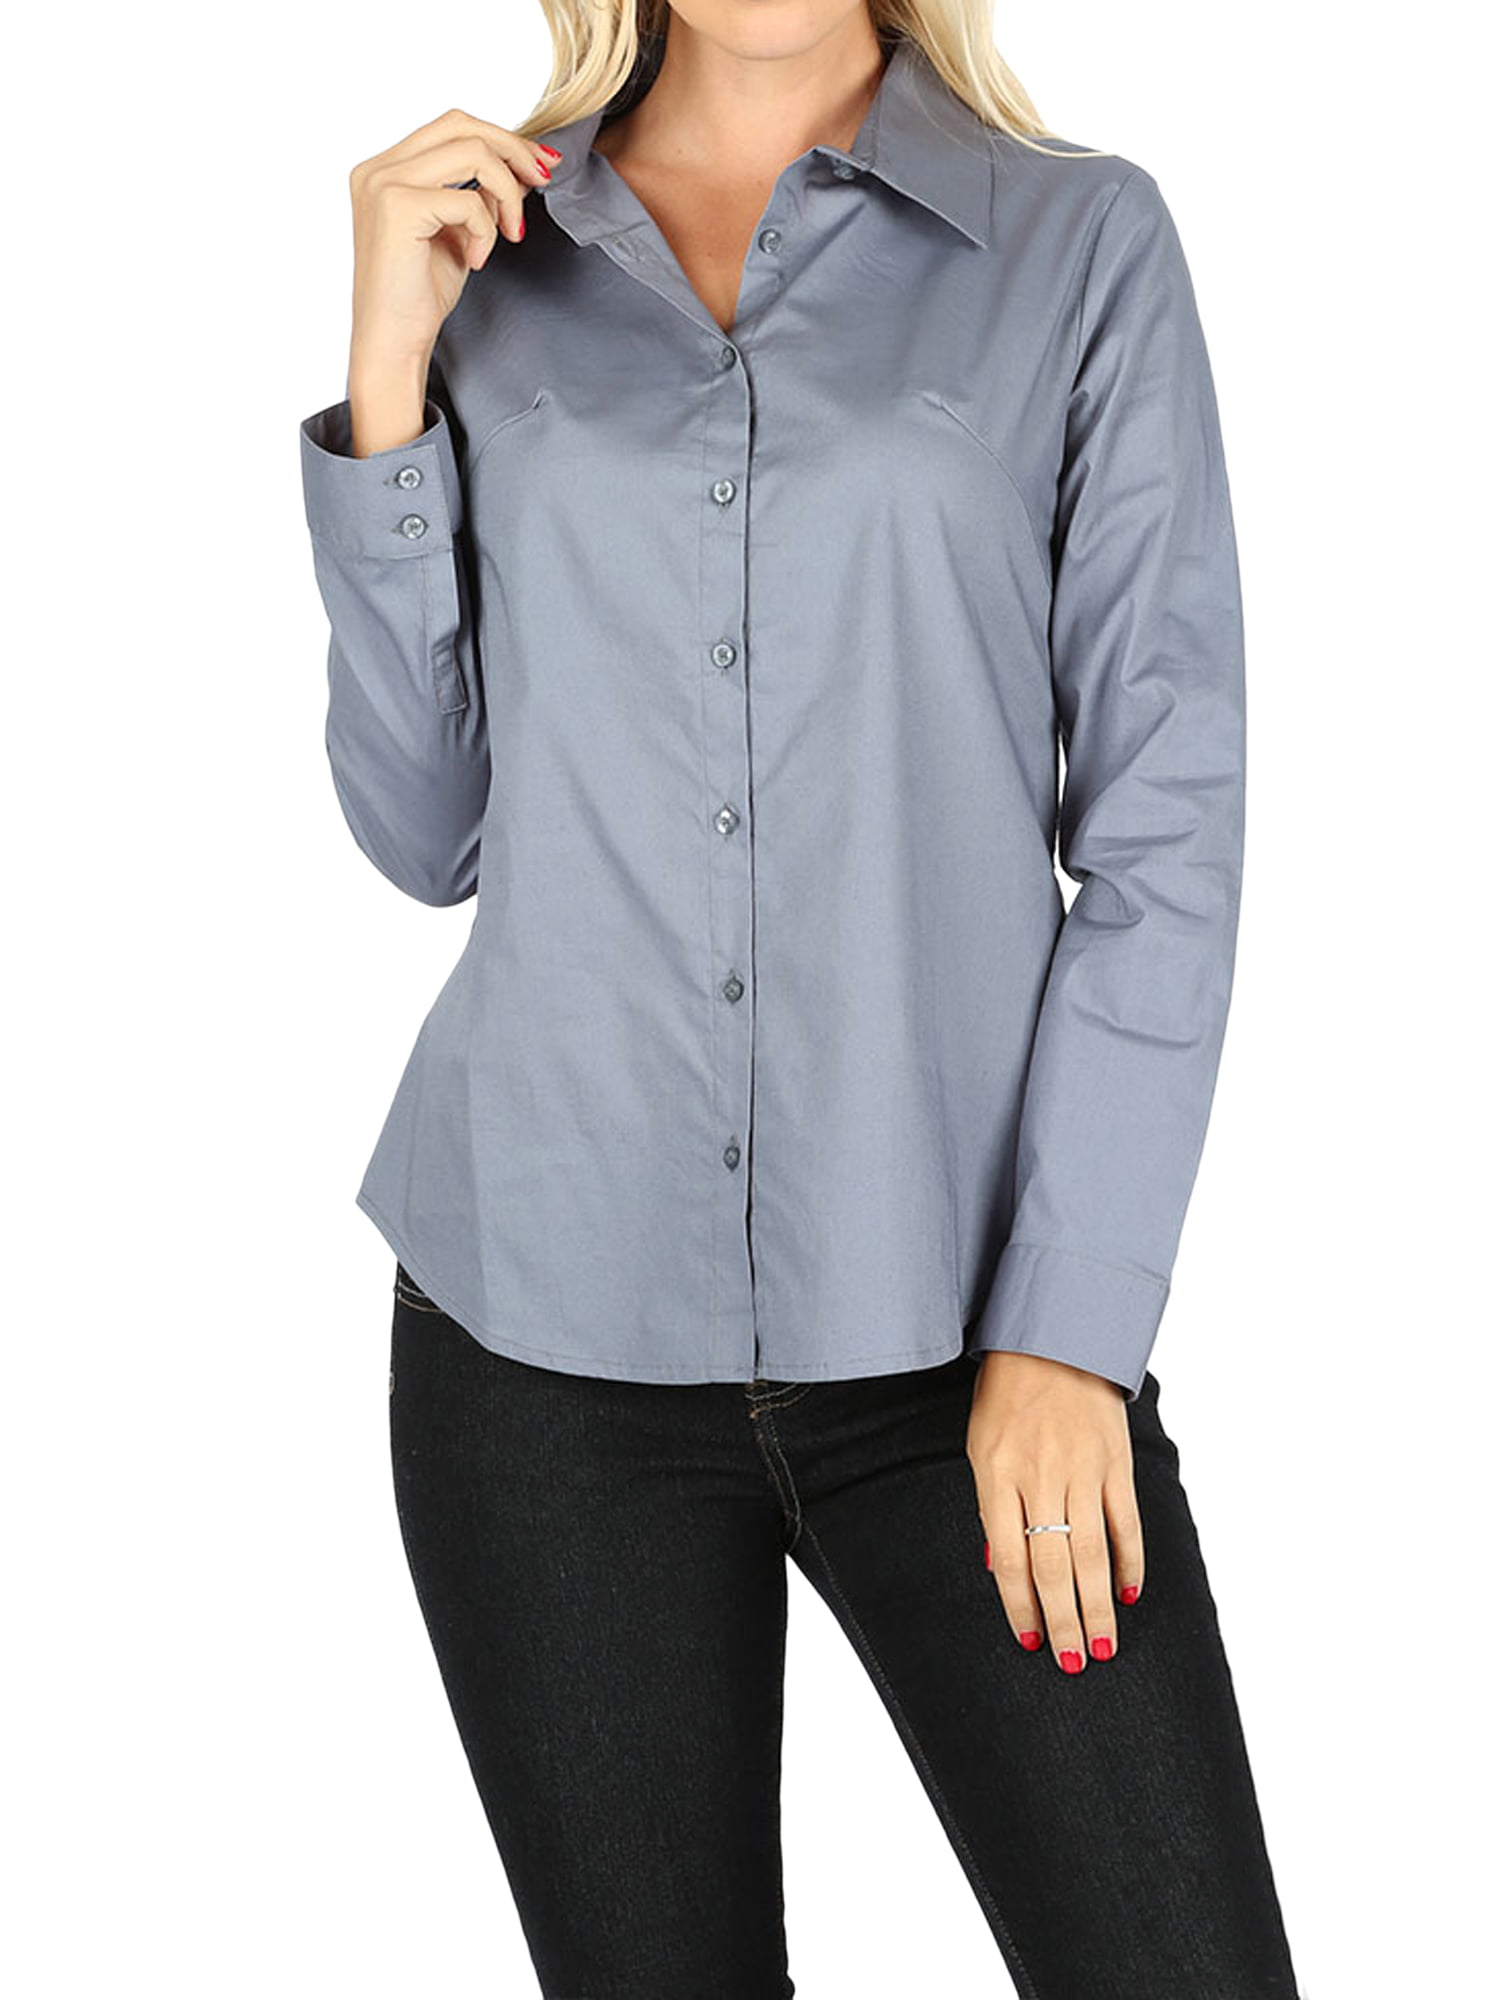 TheLovely - Women's Basic Long Sleeve Button Down Blouse Shirt (S-3XL